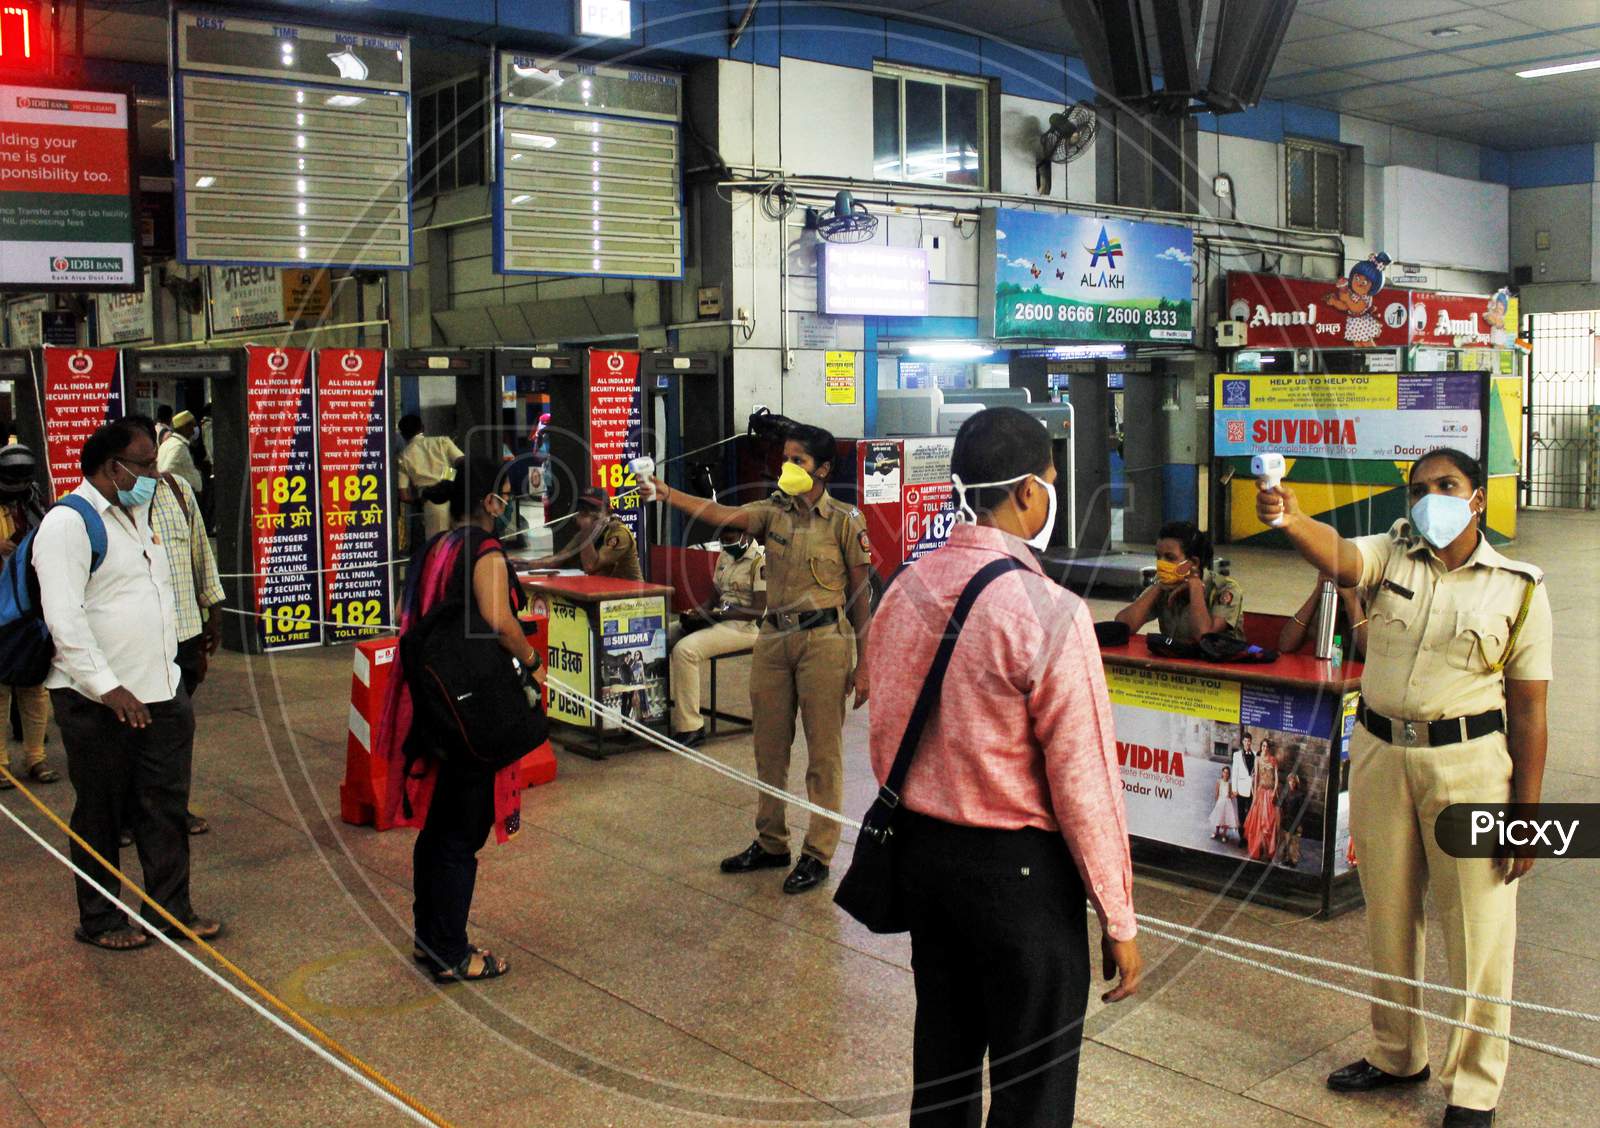 Police personnel check the temperature of the essential service workers going to board the train,  after the government eased a nationwide lockdown that was imposed as a preventive measure against the COVID-19 coronavirus, at Churchgate station, in Mumbai, India, on June 16, 2020.